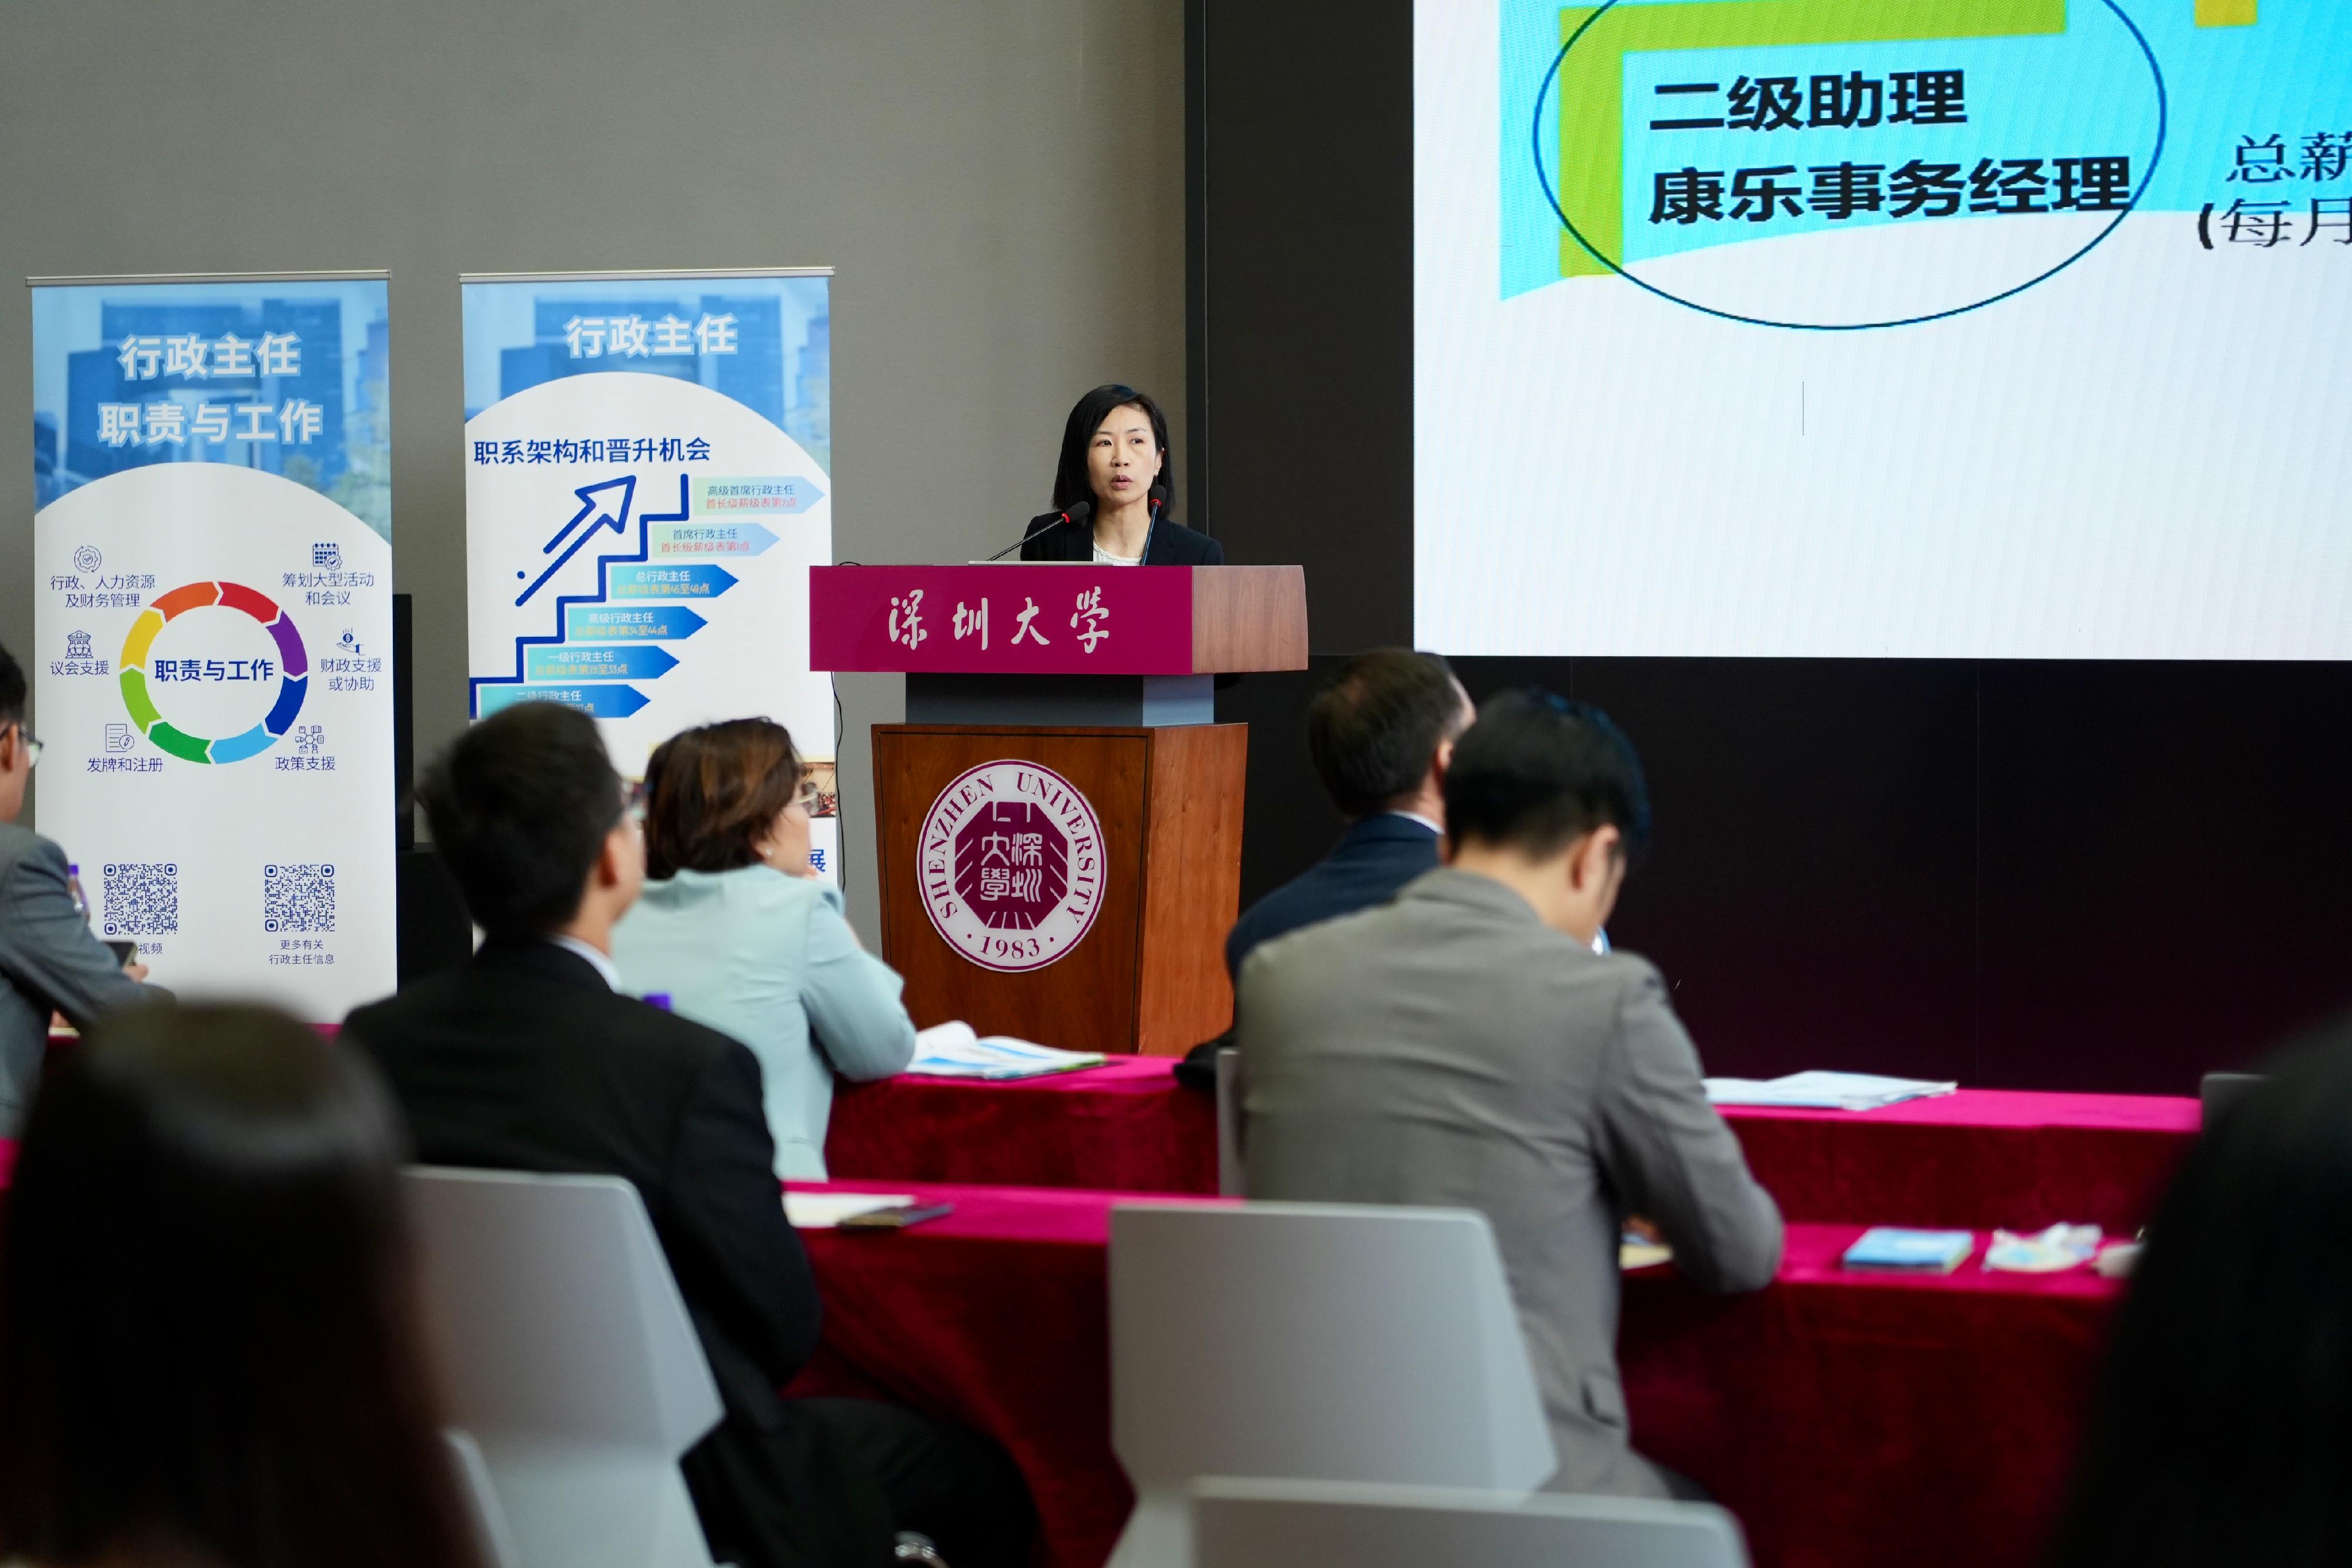 The Civil Service Bureau (CSB) led a delegation for the first time, together with representatives from the Civil Aviation Department, Civil Engineering and Development Department, Highways Department and Leisure and Cultural Services Department (LCSD), to visit the campuses of Shenzhen University, Jinan University and Huaqiao University in Shenzhen, Guangzhou, Xiamen, and Quanzhou respectively, to conduct recruitment talks for three consecutive days starting today (May 27). Photo shows LCSD Senior Executive Officer (Leisure Services) Grade Management Miss Dorothy Cheung introducing to the participating students the work, entry requirements, recruitment processes and other related information of the Leisure Services Managers and Amenities Assistants, and answering enquiries.